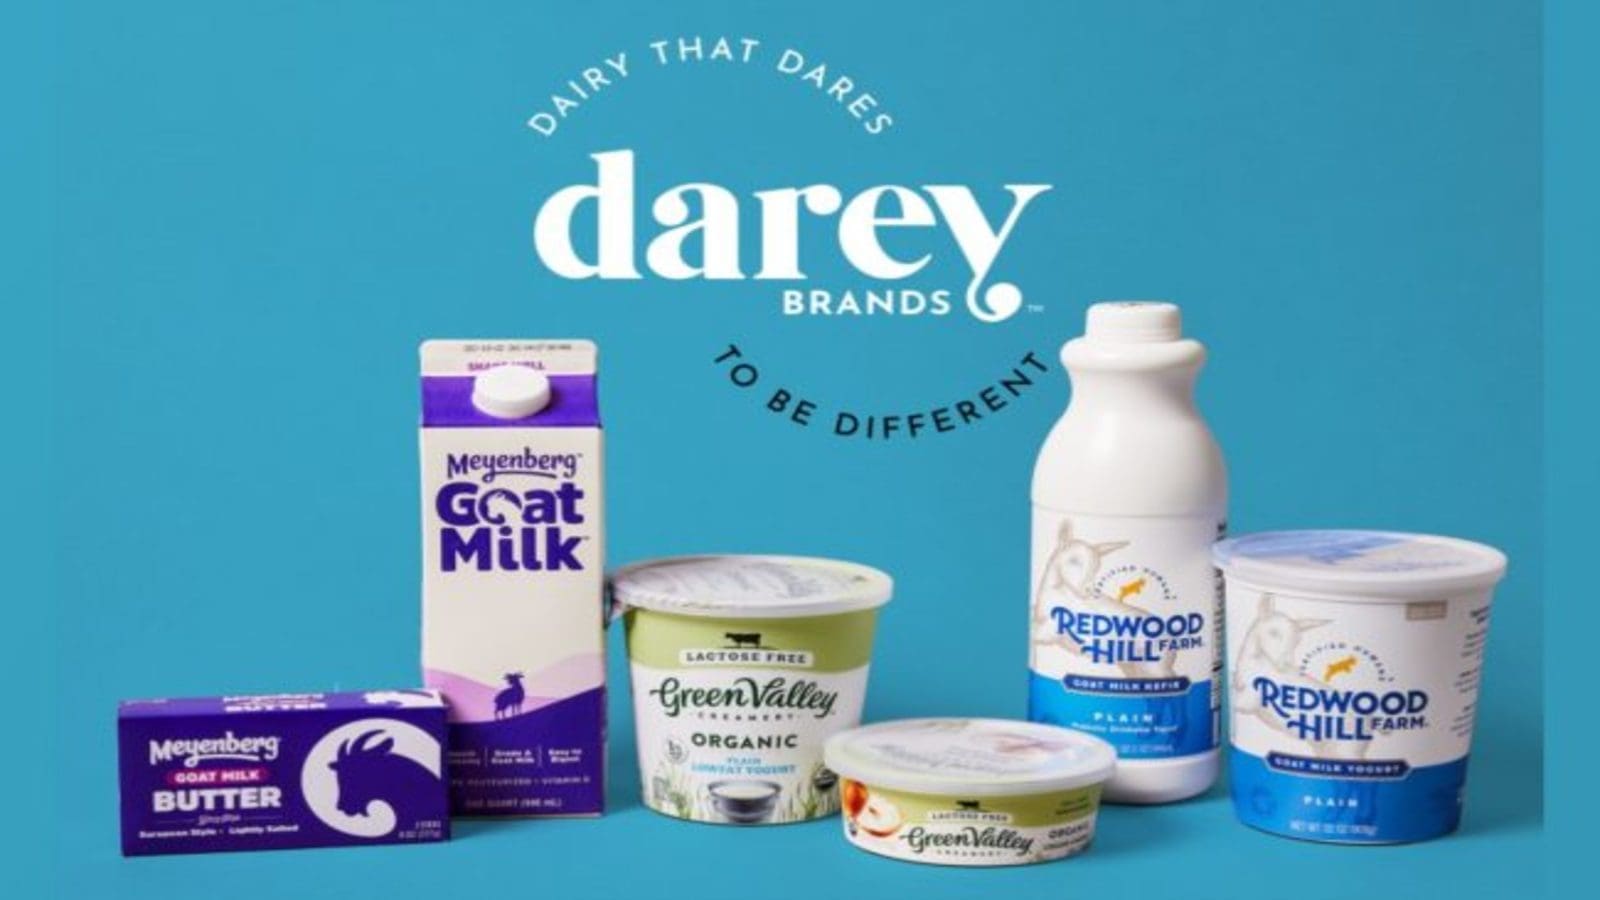 US dairy goat companies Jackson-Mitchell and Redwood Hill farm join forces to form Darey Brands